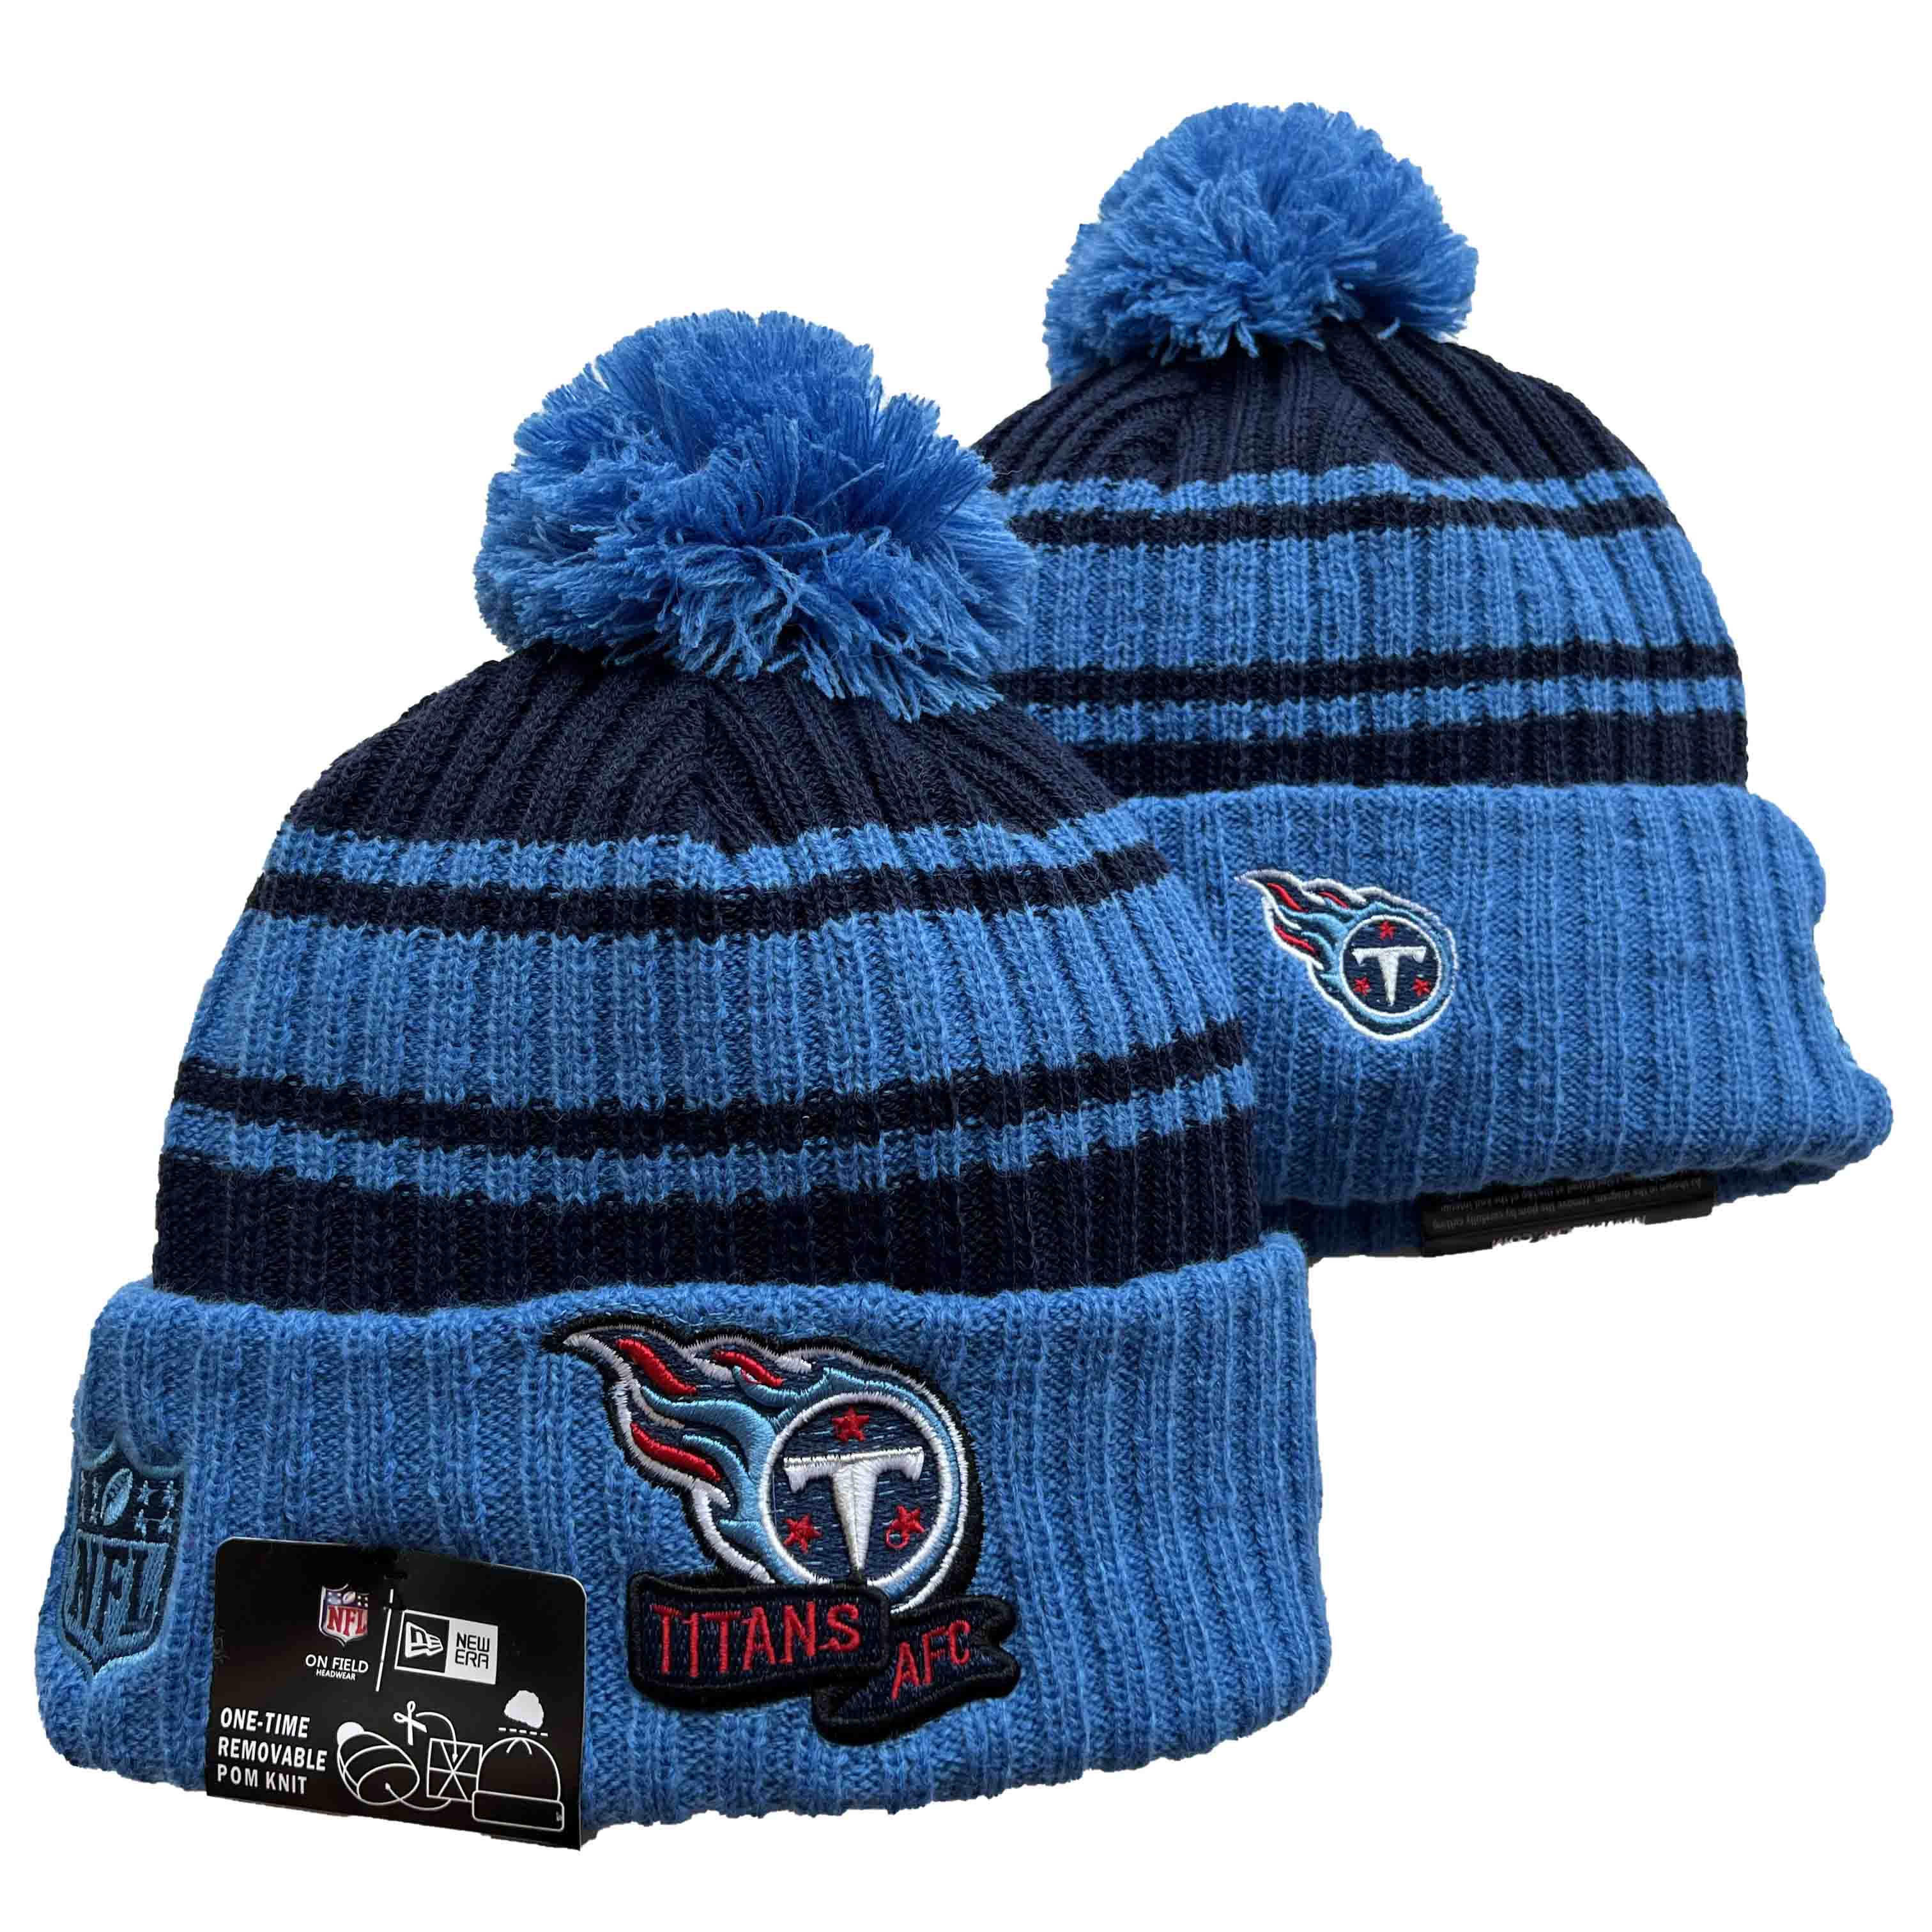 NFL Tennessee Titans Beanies Knit Hats-YD1313